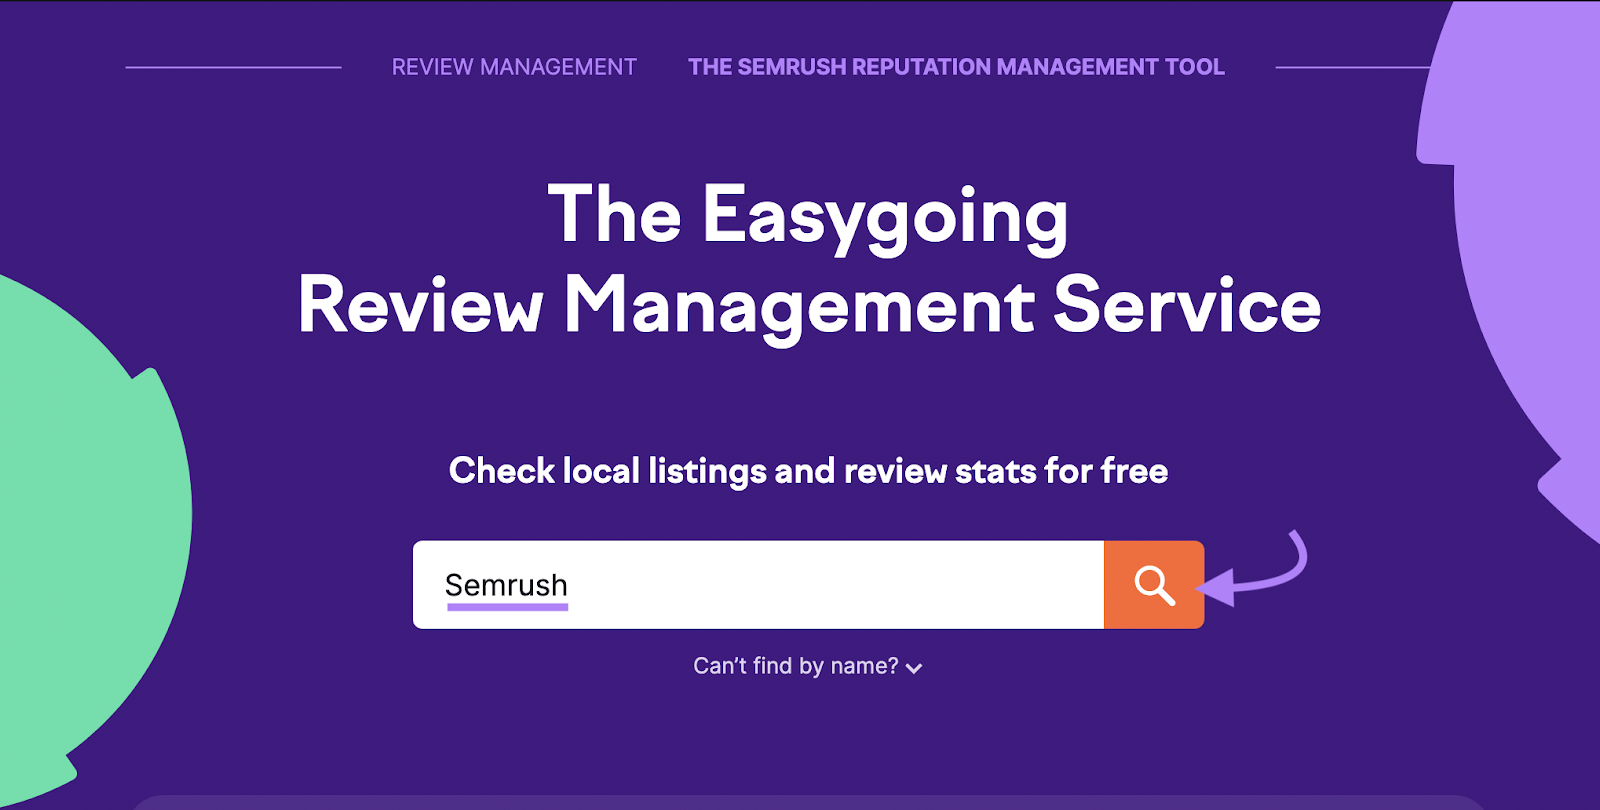 "Semrush" entered into Review Management search bar